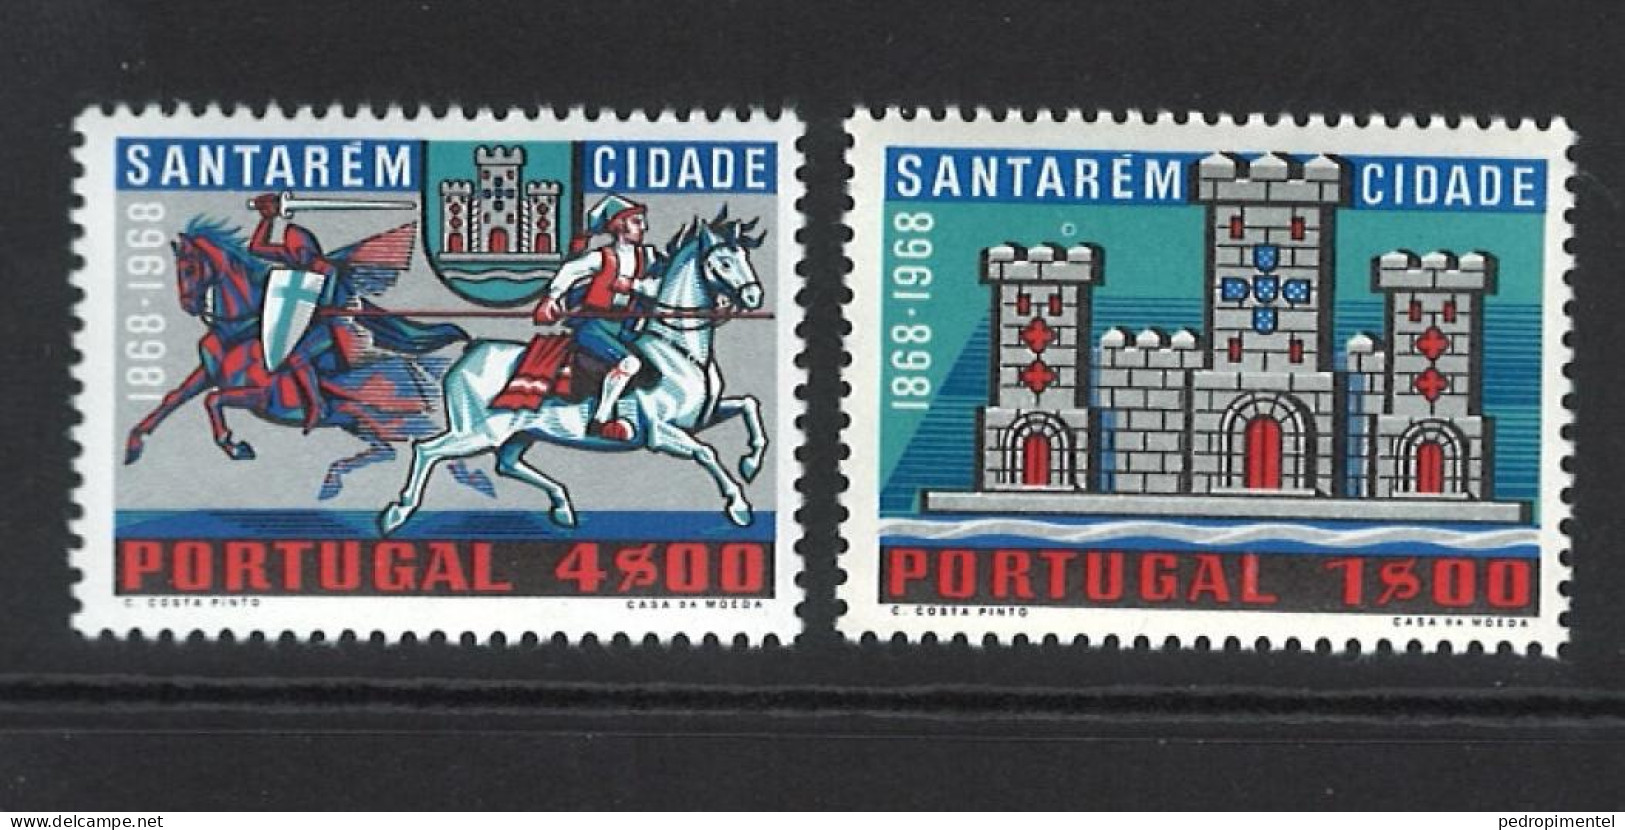 Portugal Stamps 1970 "Covilha And Santarem" Condition MNH #1079-1082 (4 Stamps) - Ongebruikt